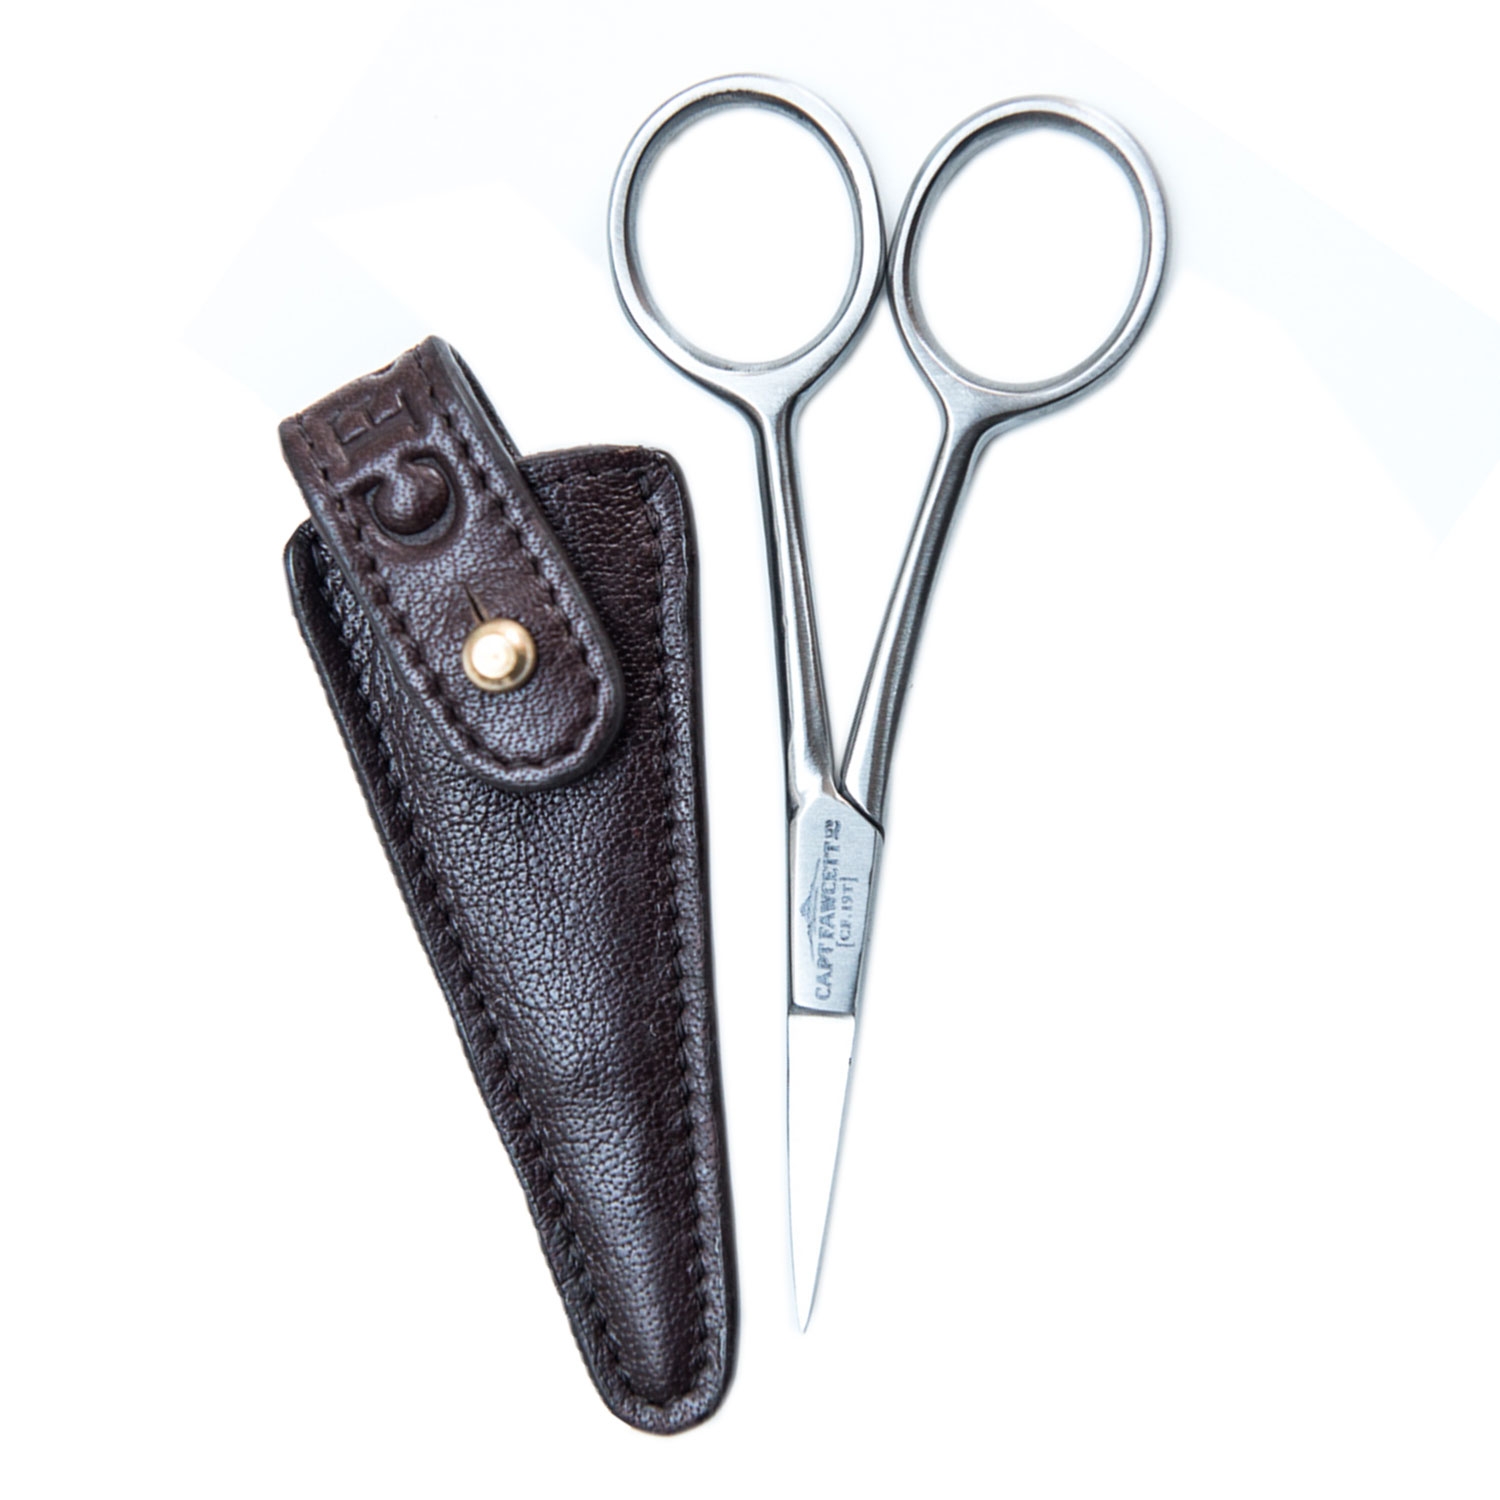 Product image from Capt. Fawcett Tools - Grooming Scissors